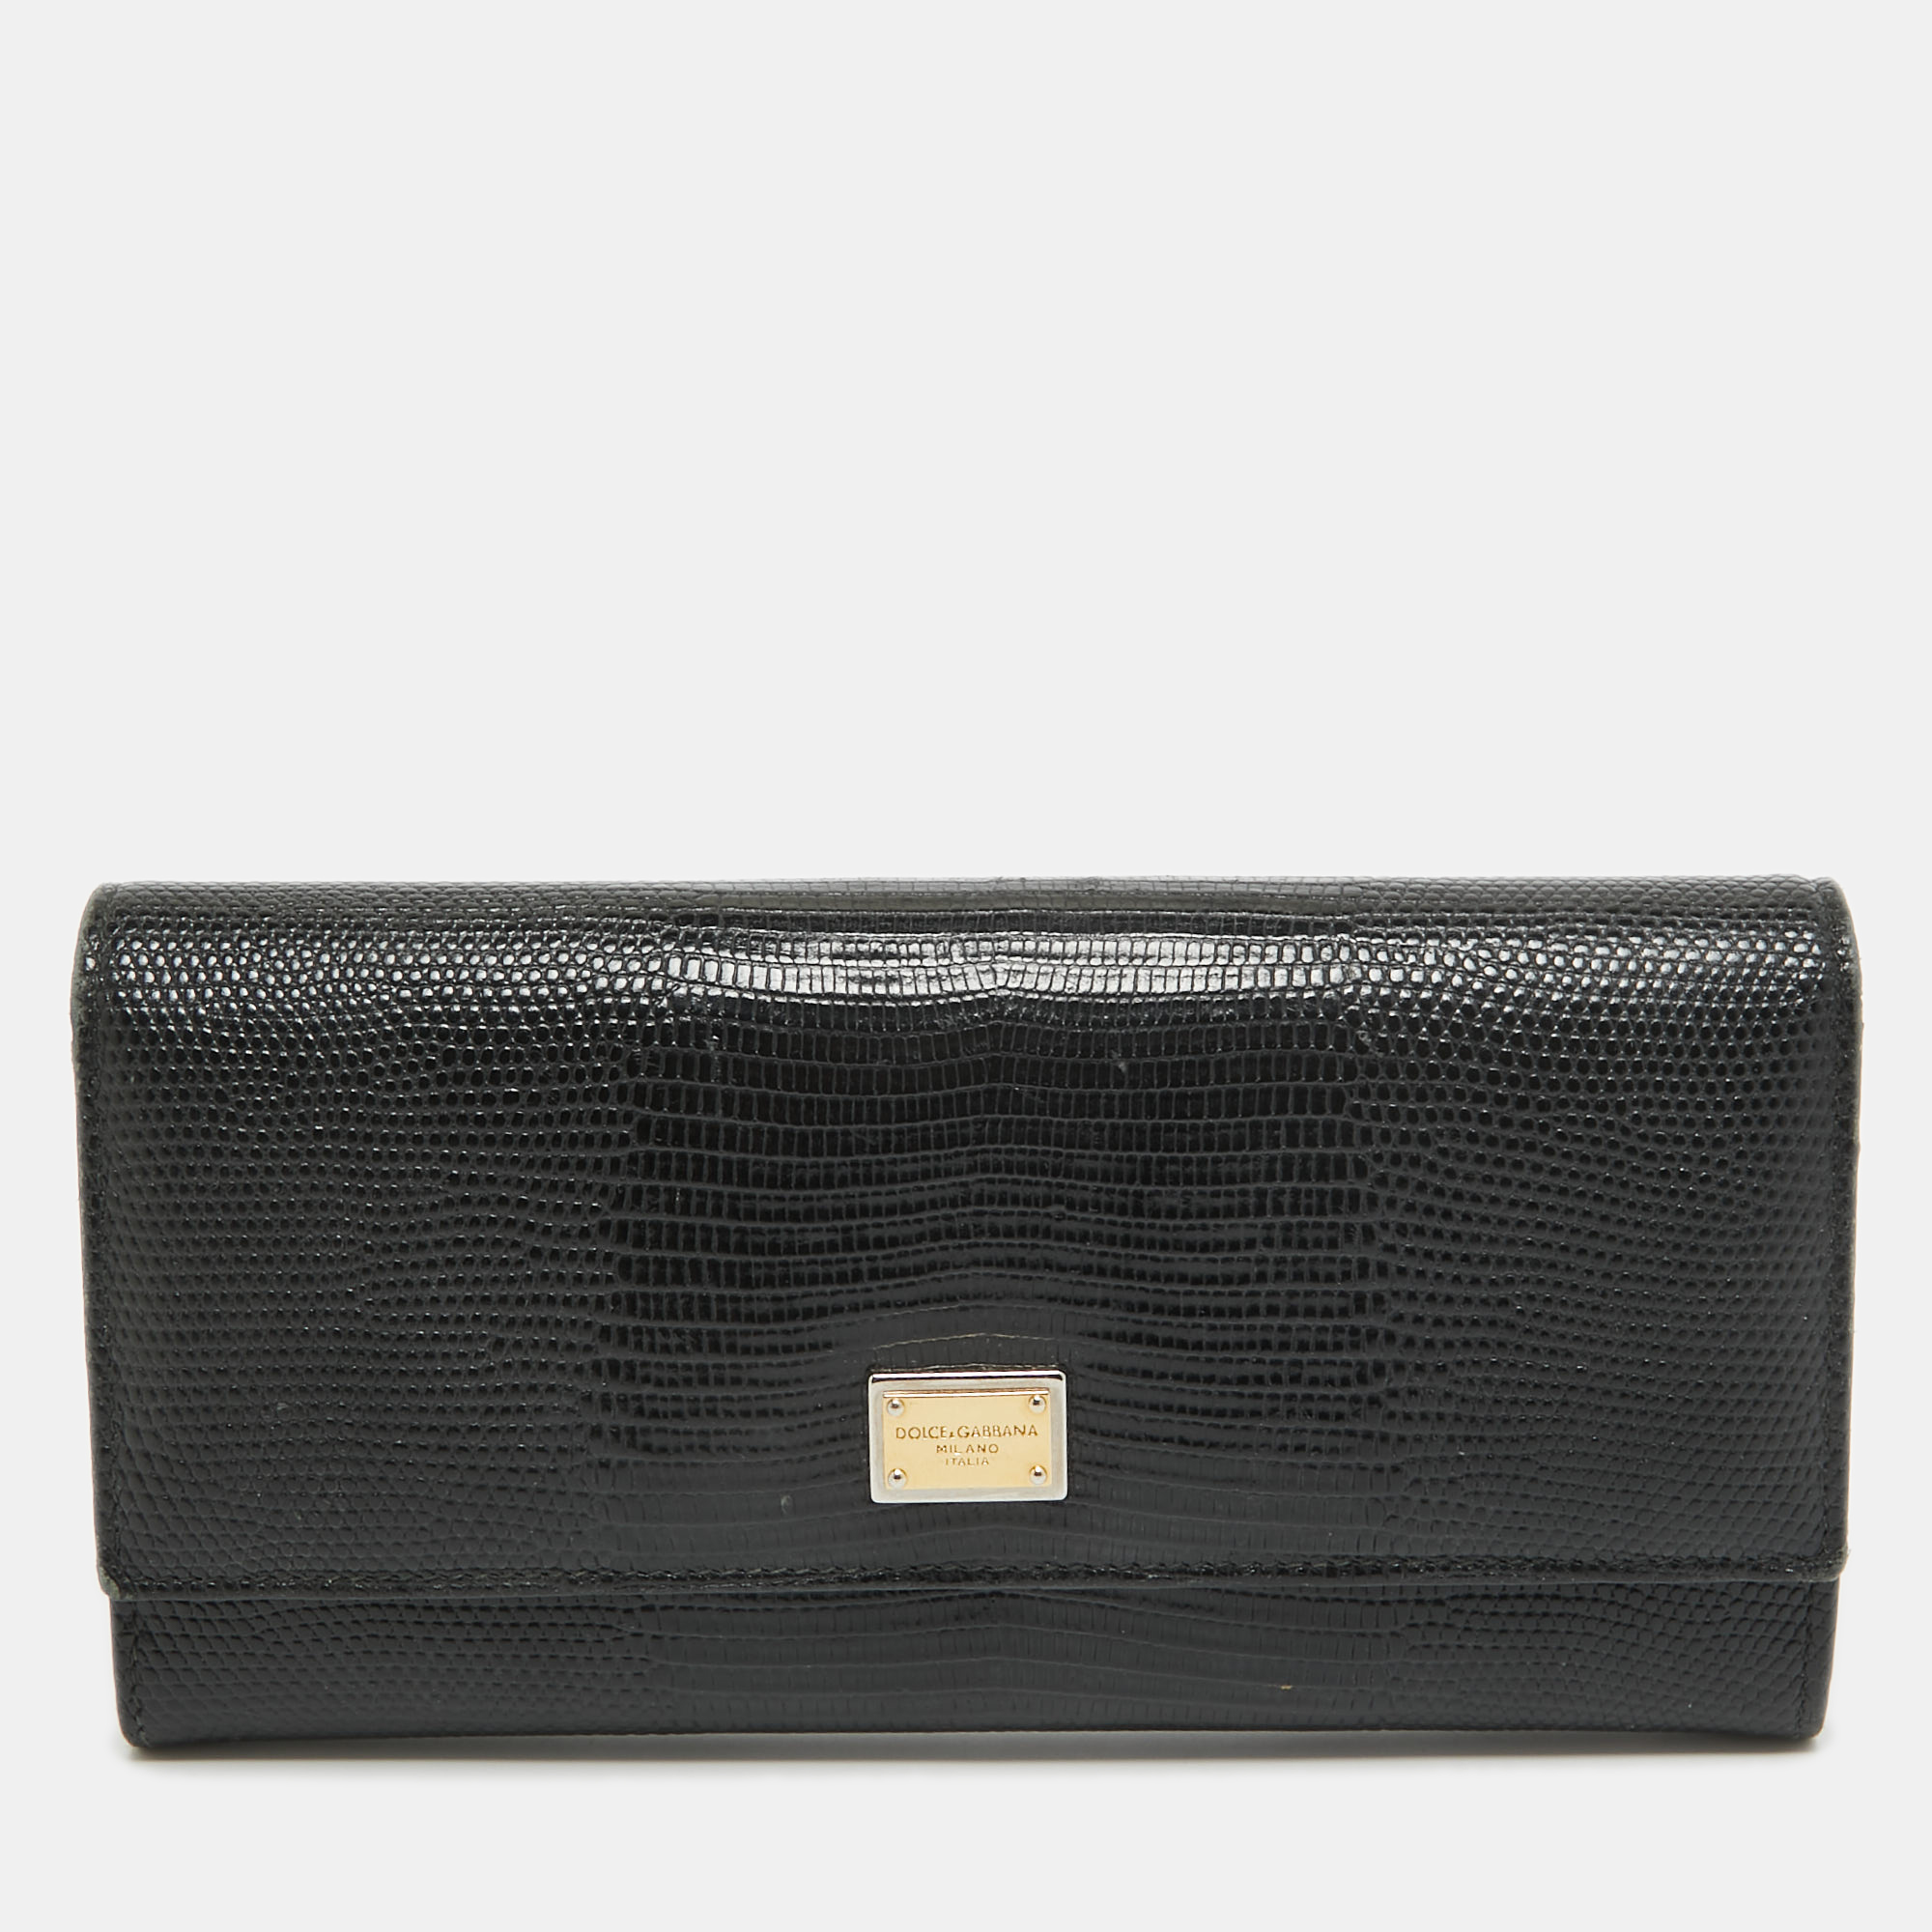 Pre-owned Dolce & Gabbana Black Lizard Embossed Leather Flap Continental Wallet